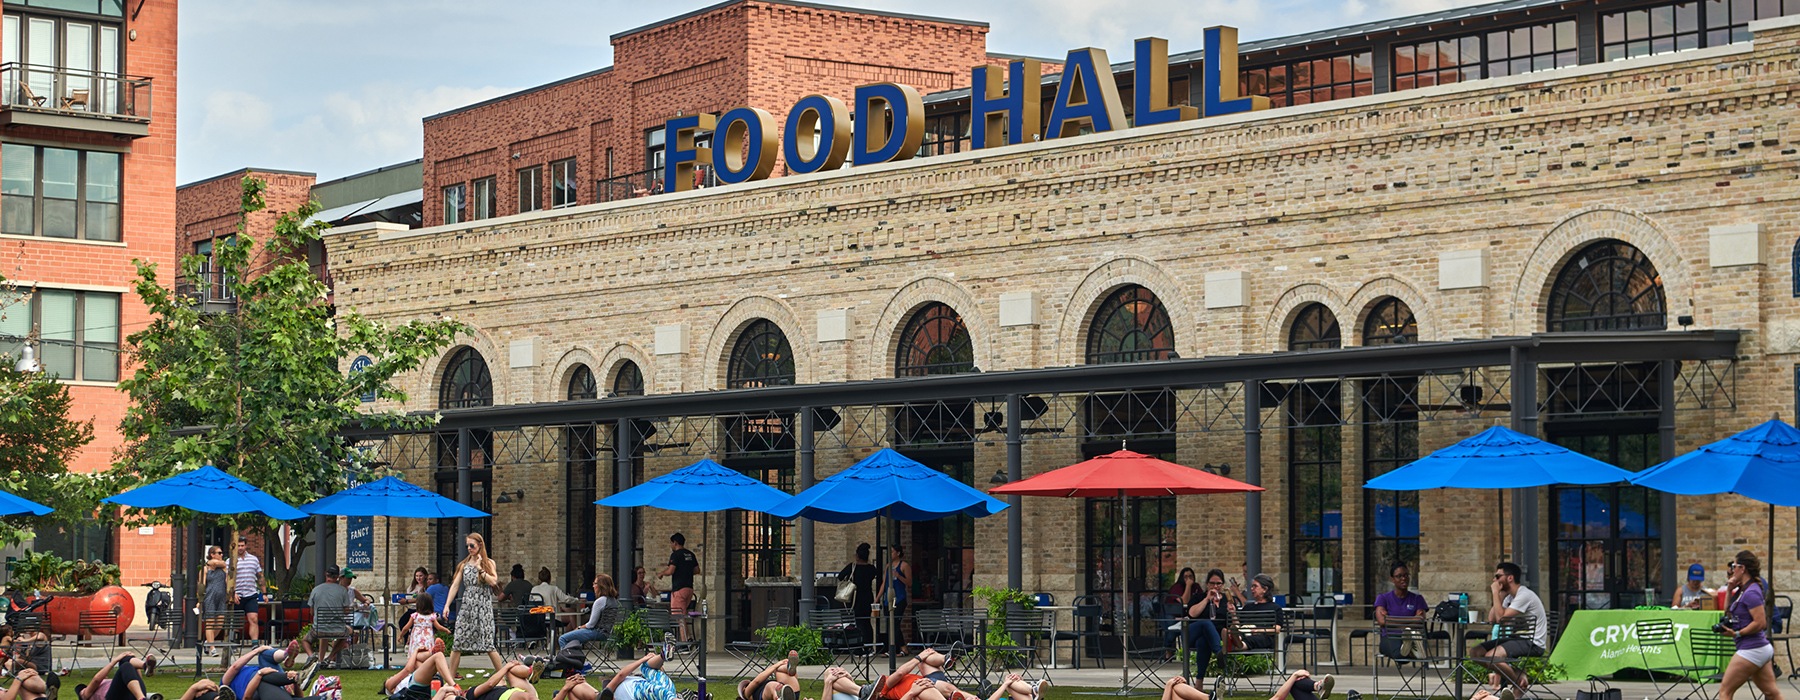 view of a local food hall with outside seating